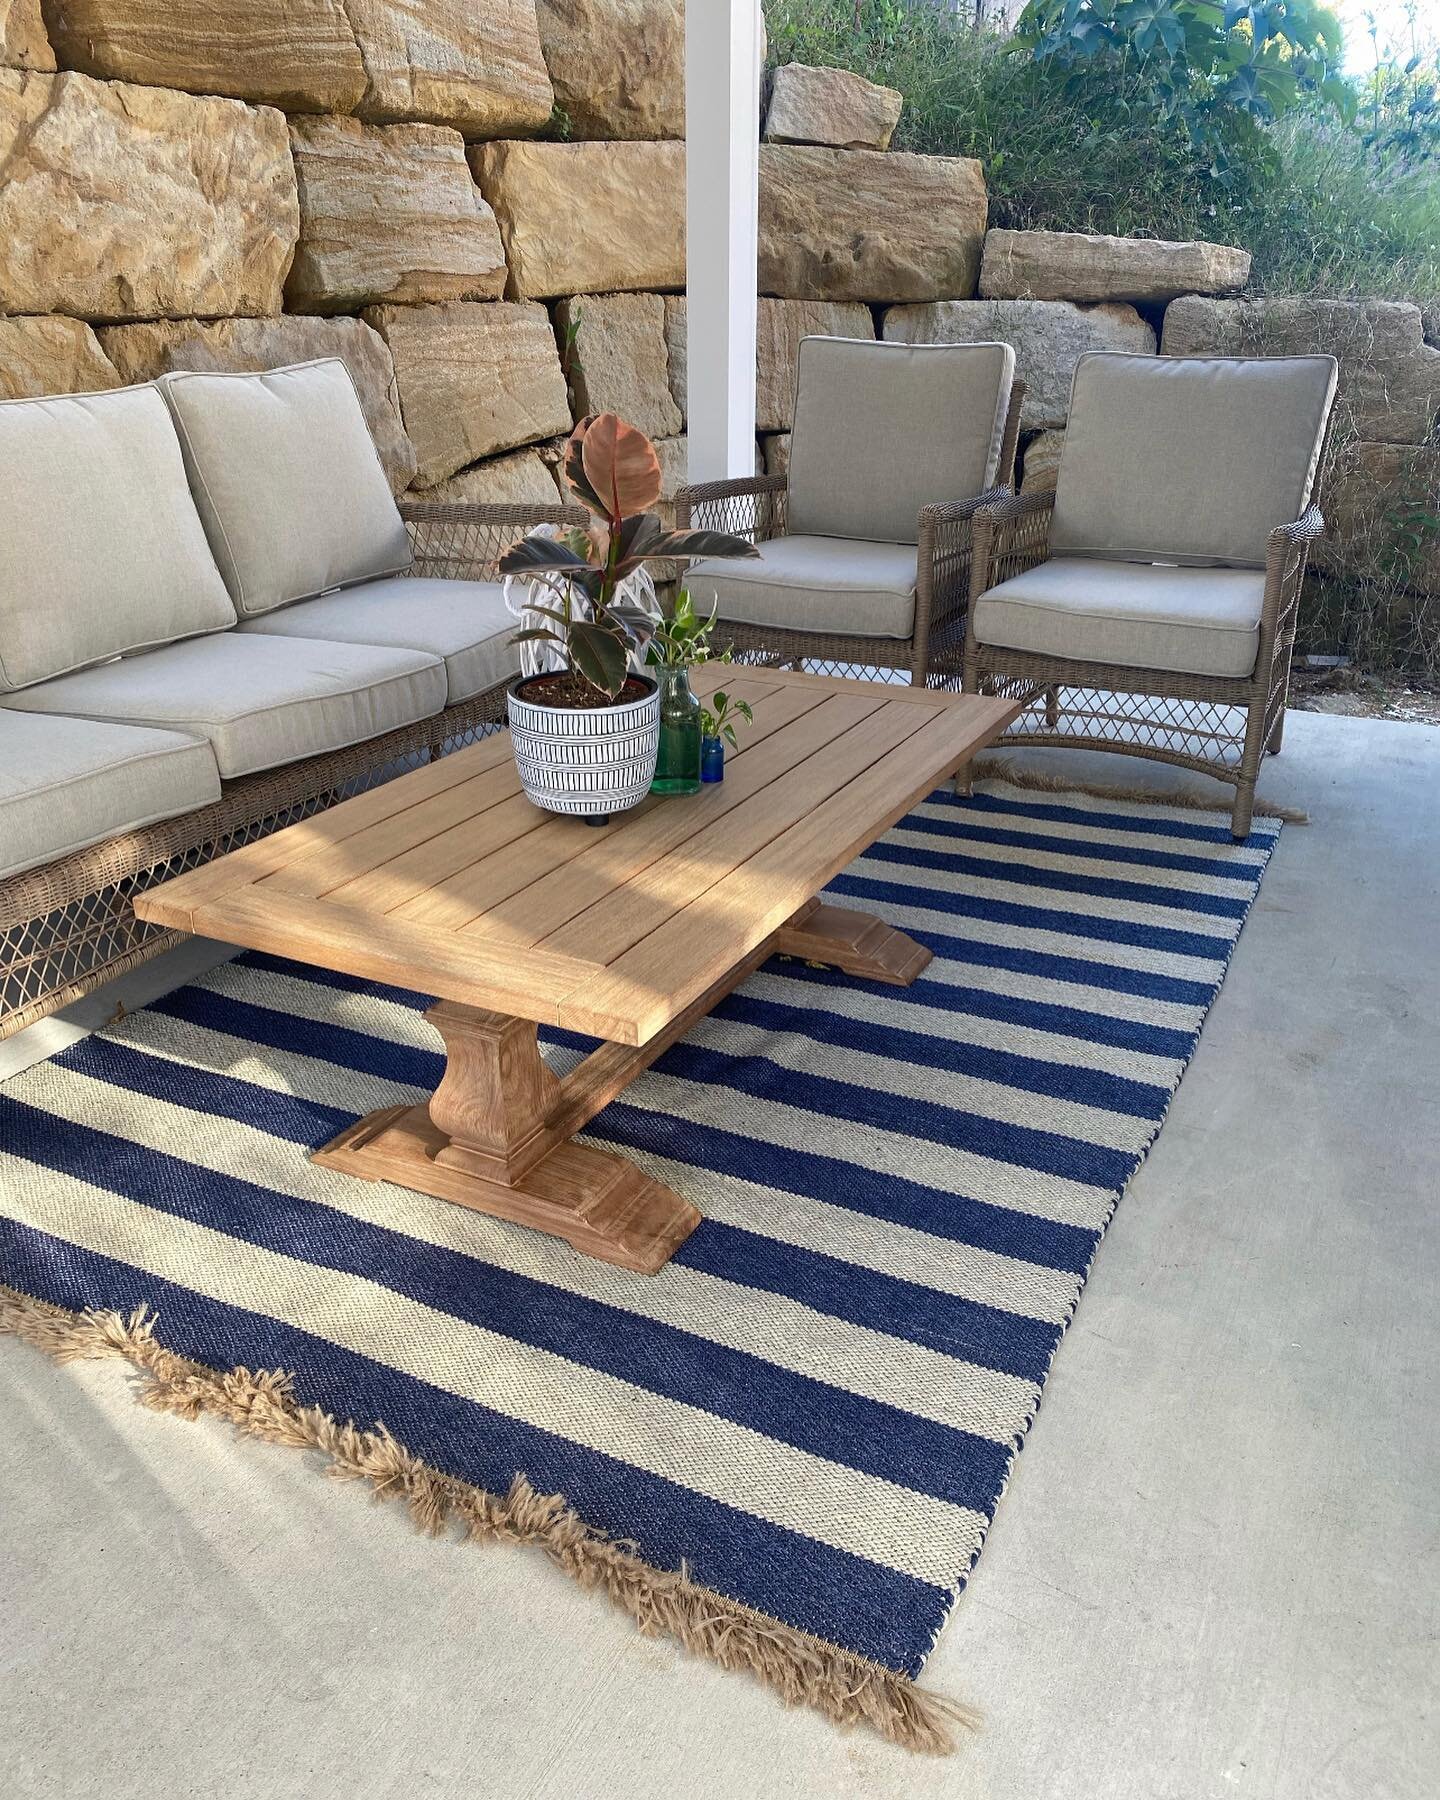 . 
I get so excited when I see our OUTDOOR RUGS in their new homes. . .
Look how happy our REVERSIBLE DOUBLE BAY RUG looks in its new home
💙
Available-
Blue
Charcoal
Green
Tan
All with a wide stripe on one side &amp; a small stripe on the other
💙
D